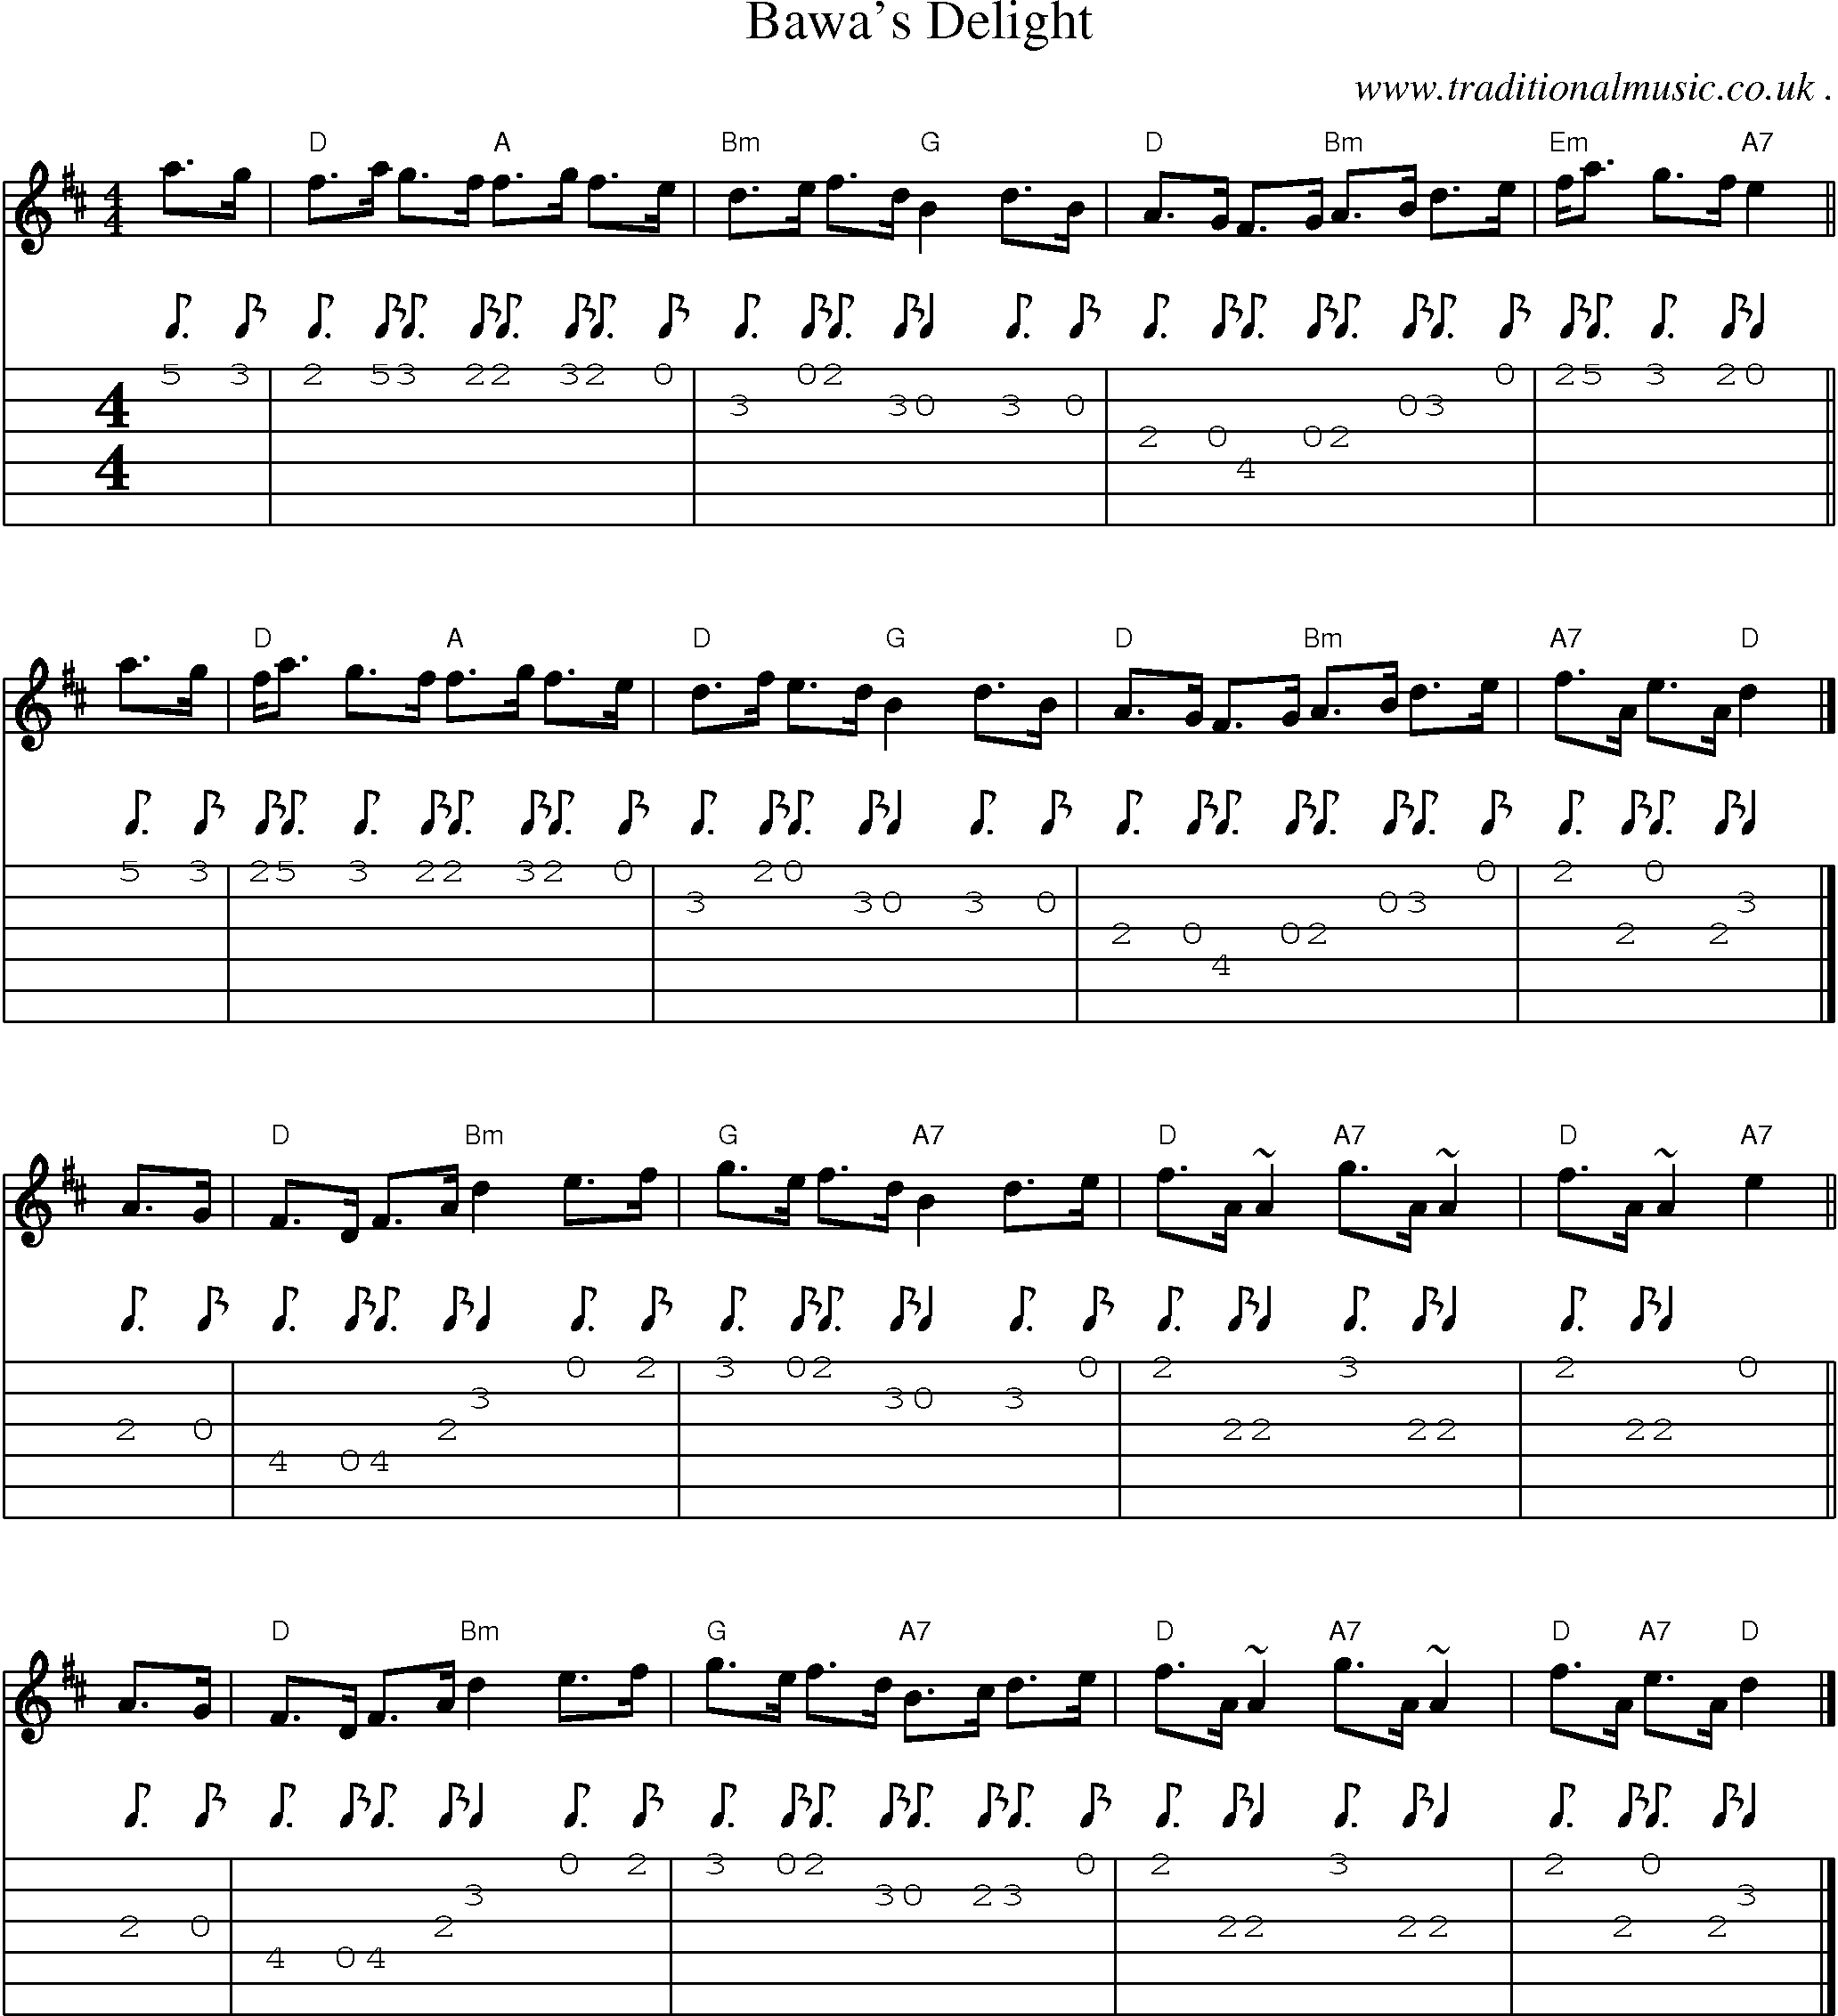 Sheet-music  score, Chords and Guitar Tabs for Bawas Delight